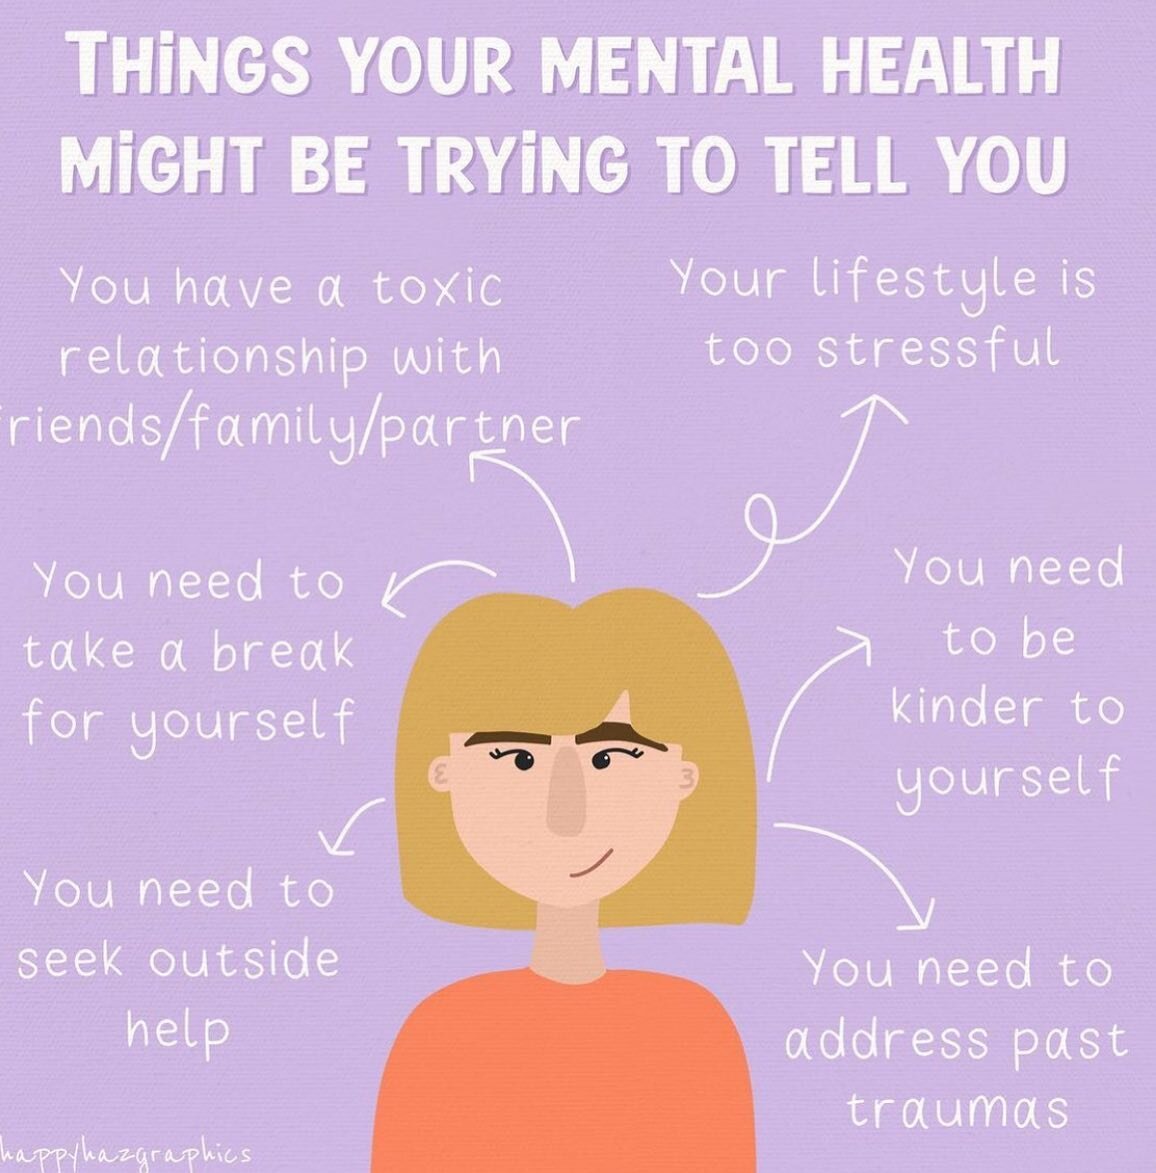 Mental health problems are common. Up to 1 in 4 people have experienced mental illness.
Stressful events such as losing a job, relationship issues, bereavement or money issues can lead to mental illness. But there can be other factors, like a family 